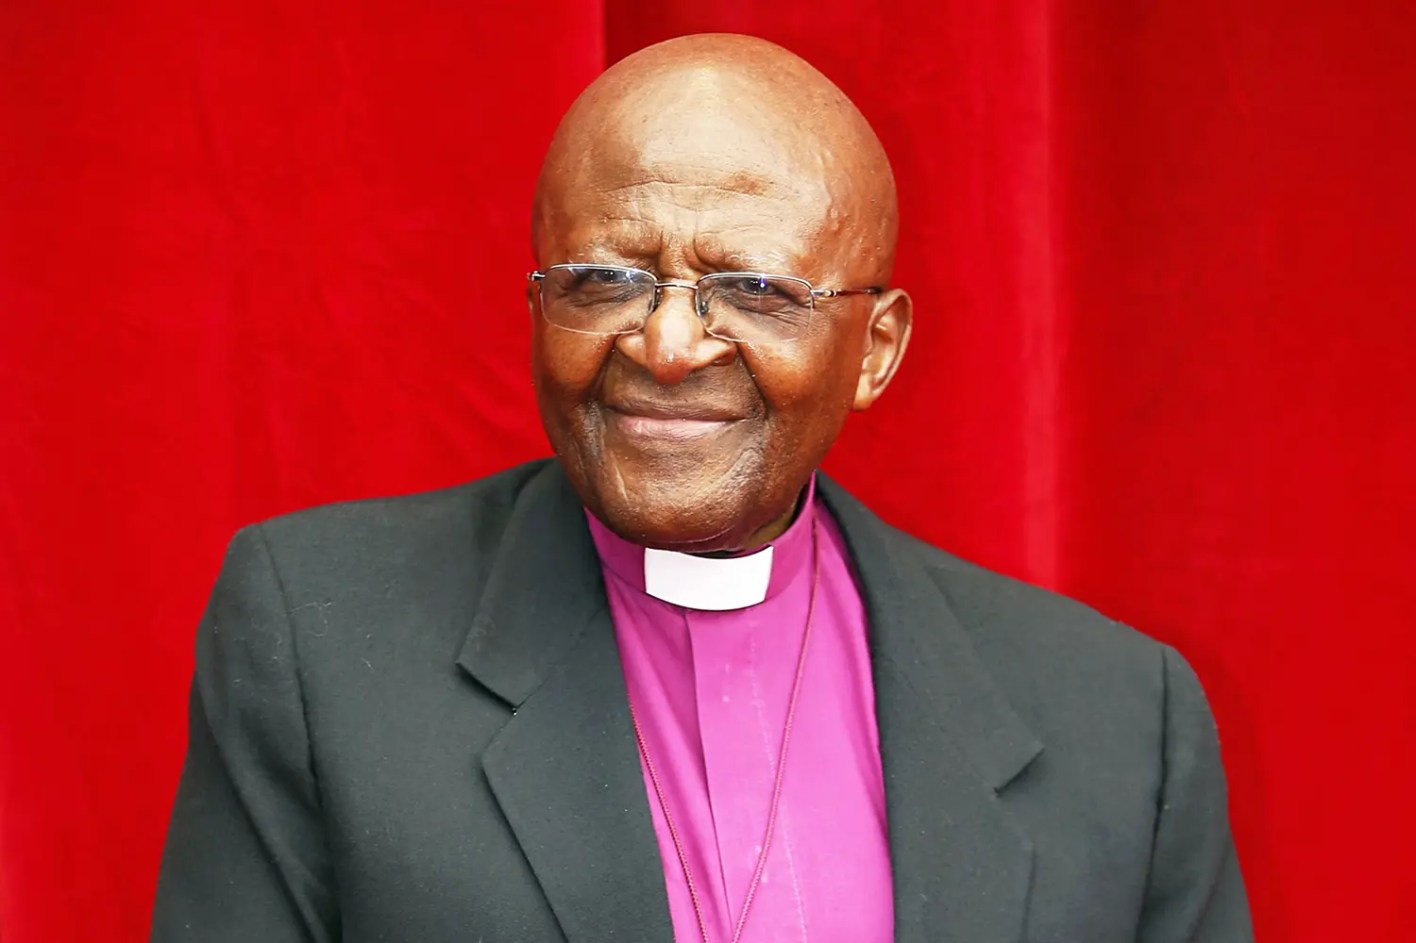 World leaders pay tribute to Desmond Tutu